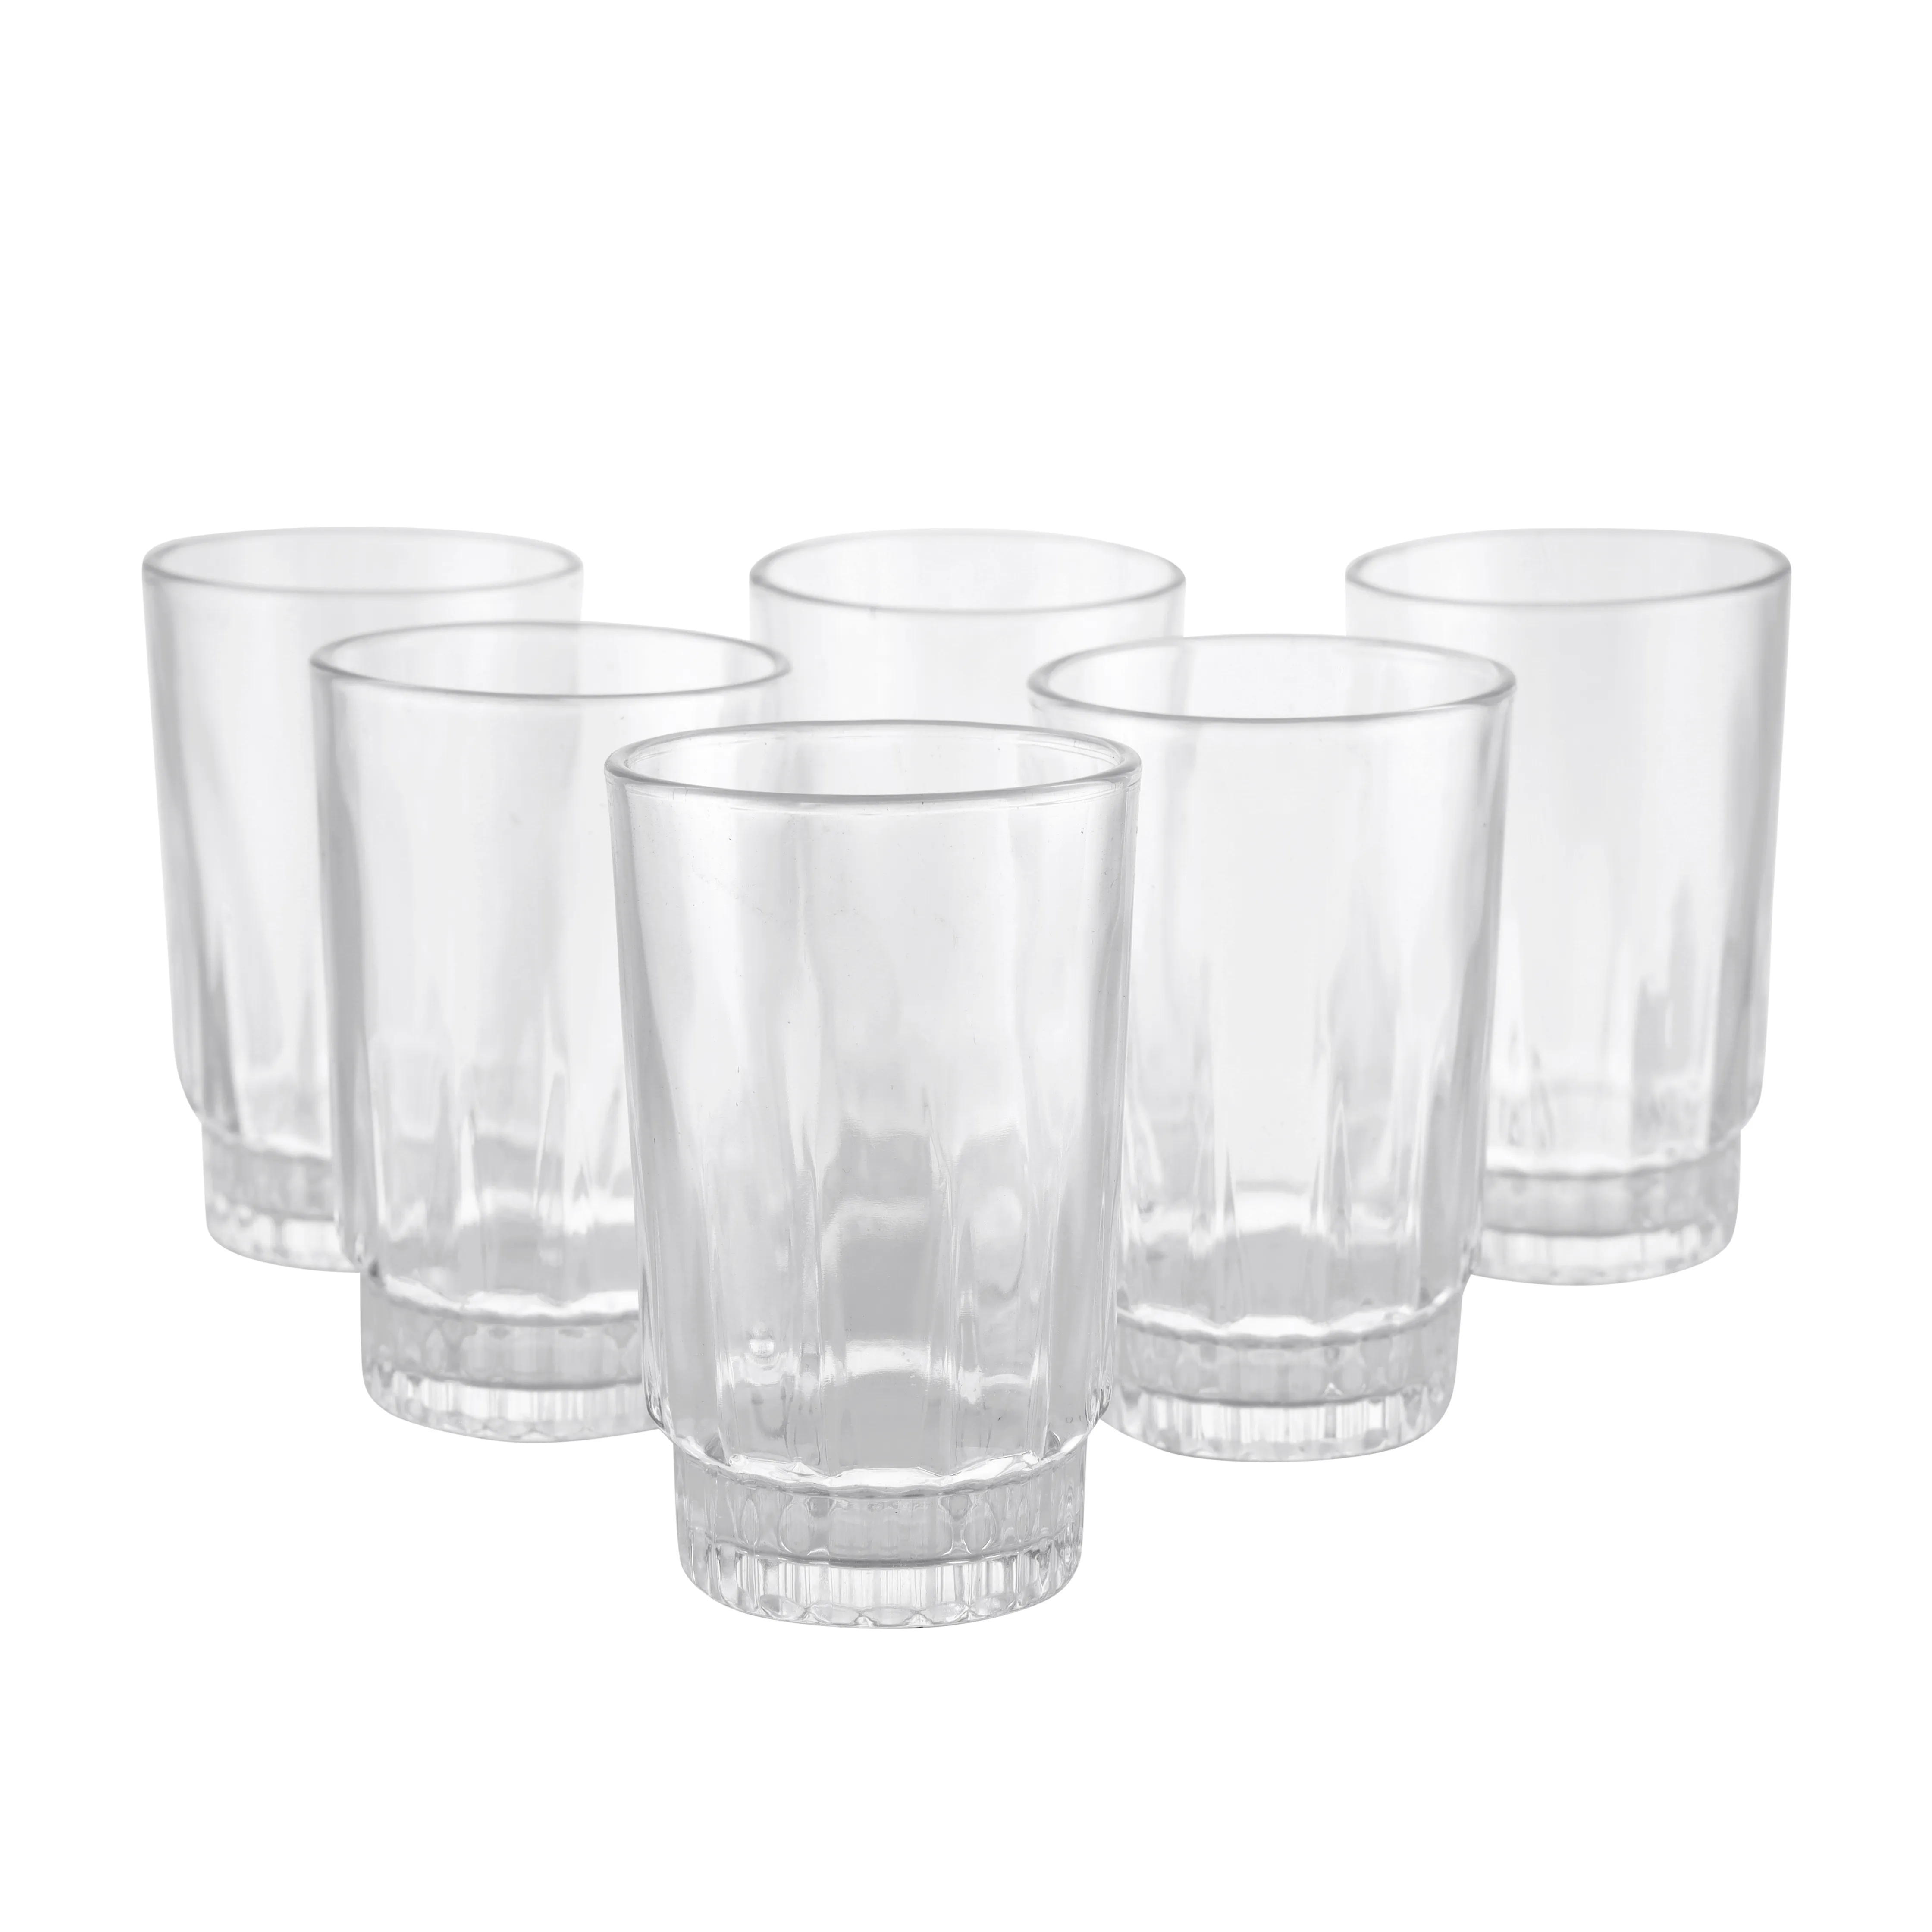 Royalford  RF9818 6Pcs 240ml Glass Tumbler - Portable Water Cup Drinking Glass Lead-Free Dishwasher Safe Ideal for Party Picnic BBQ Camping Garden Ideal for Water Wine Whisky Drinking & More